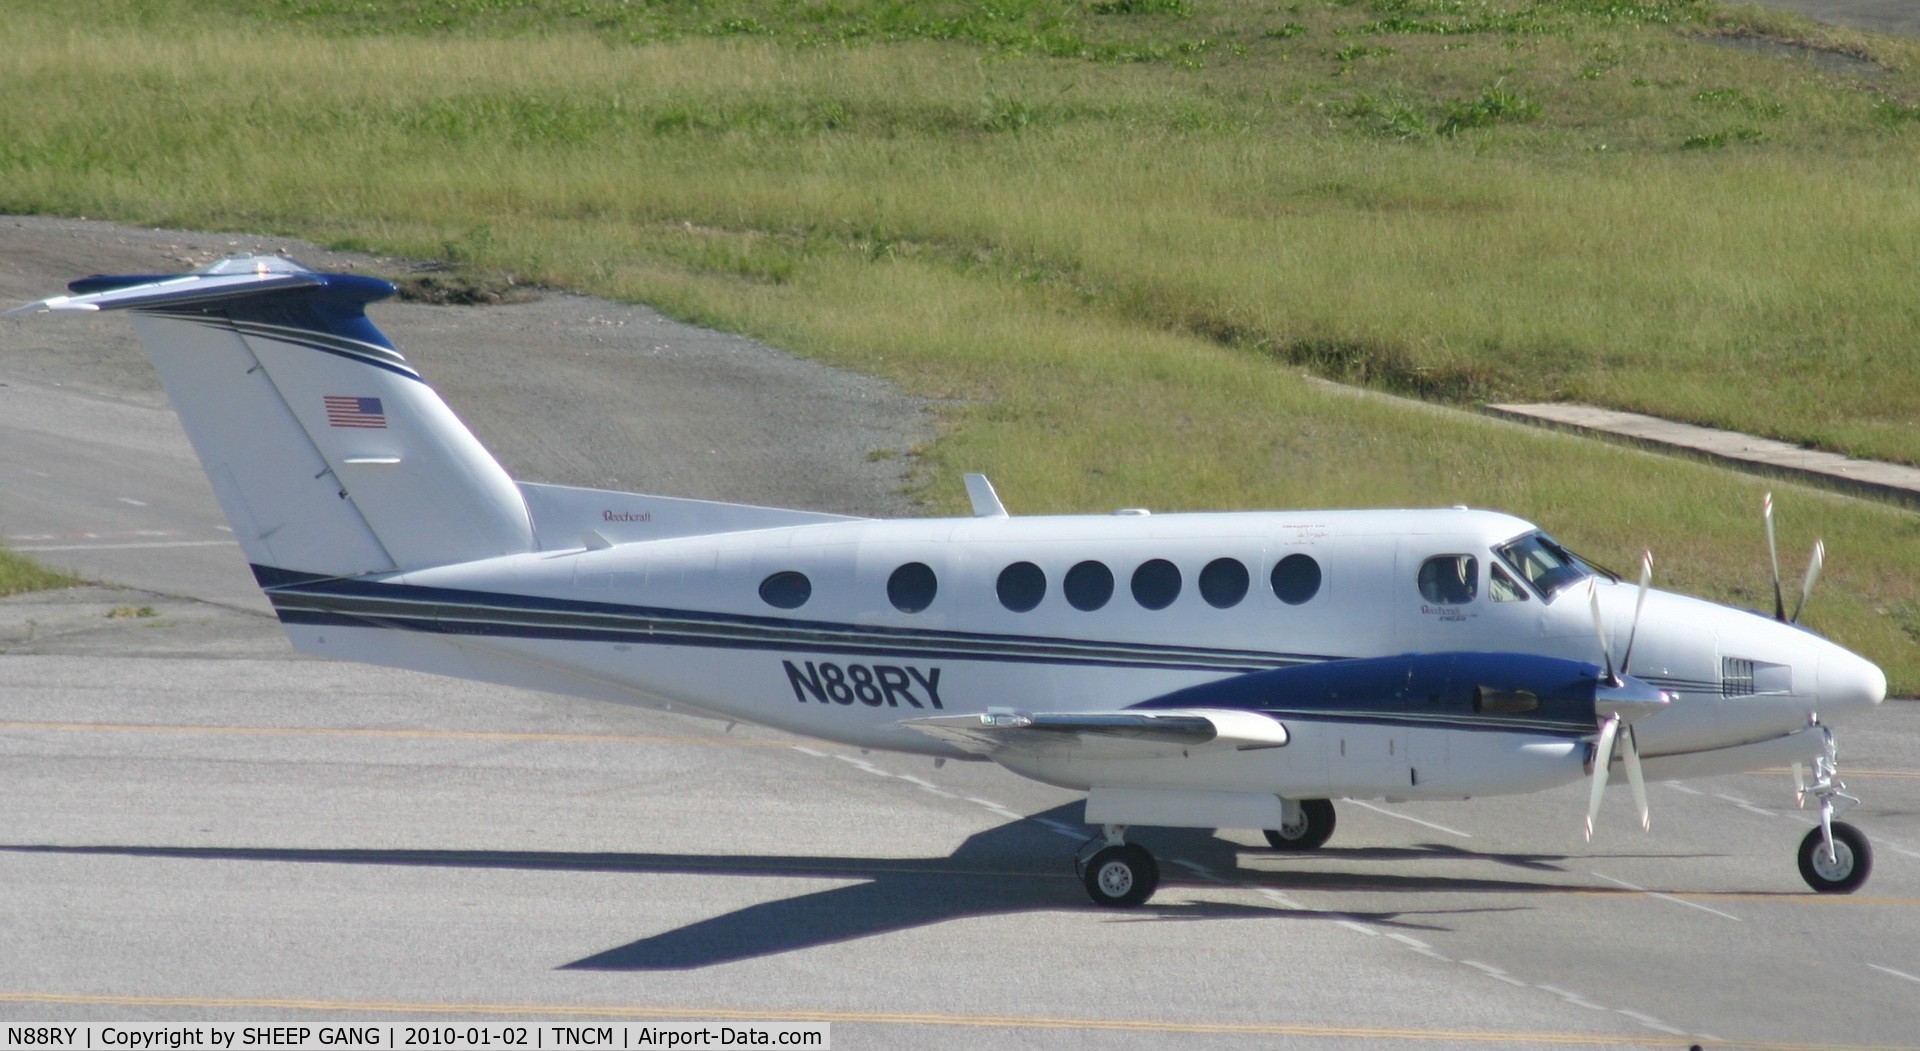 N88RY, 1987 Beech 300 C/N FA-122, N88RY taxing to the holding point alpha for take off